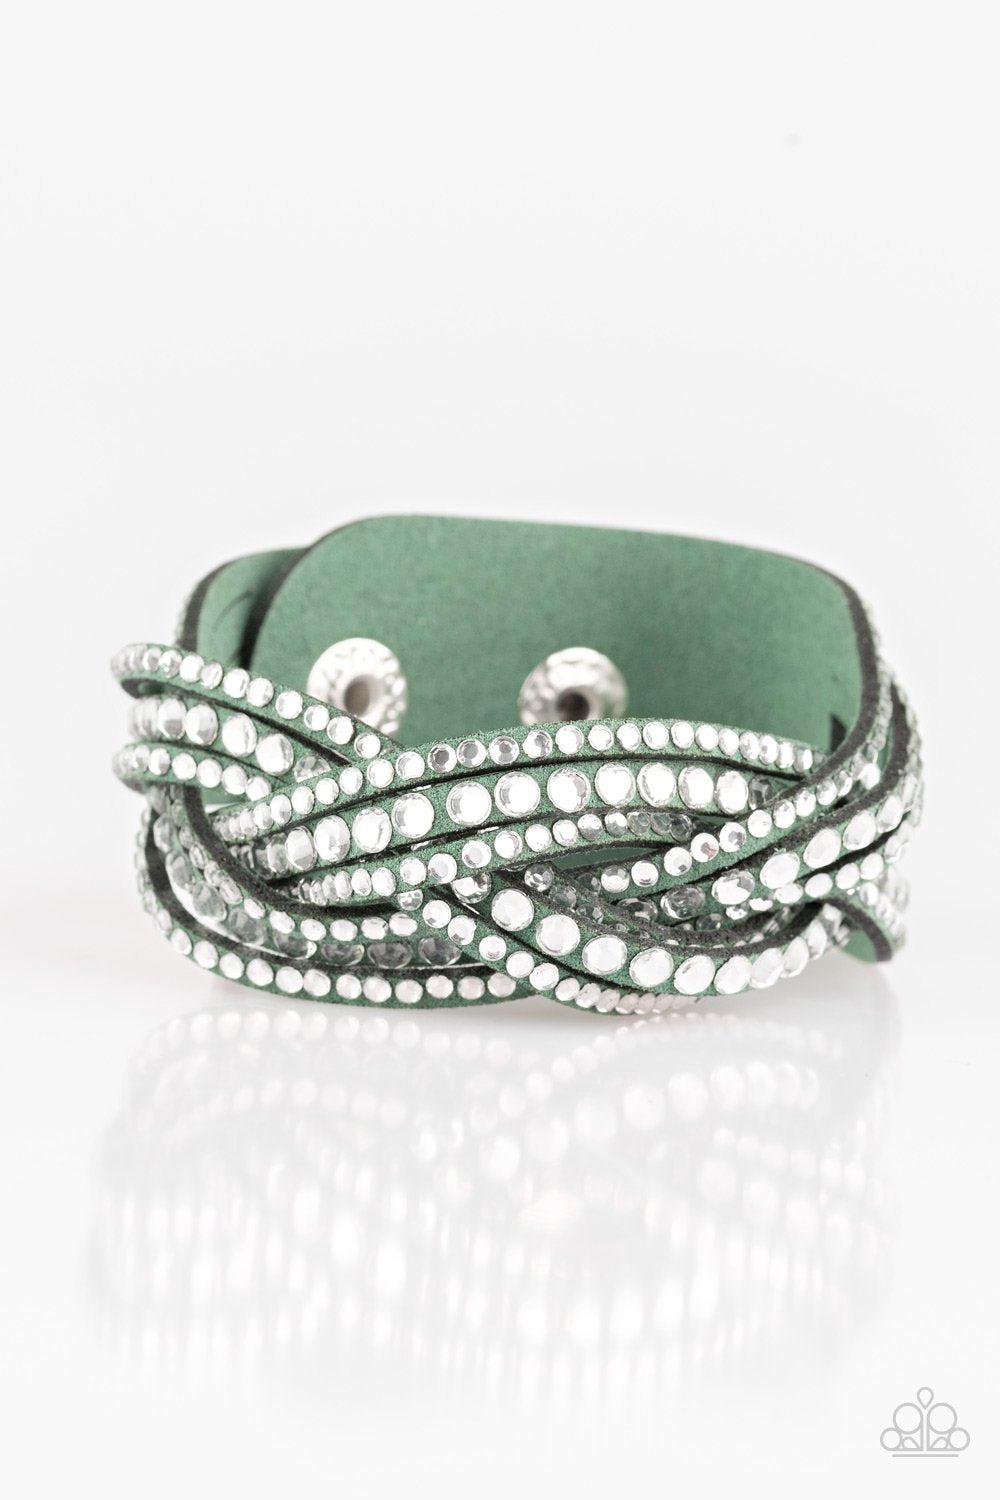 Bring on the Bling Green and White Rhinestone Braided Urban Wrap Snap Bracelet - Paparazzi Accessories-CarasShop.com - $5 Jewelry by Cara Jewels